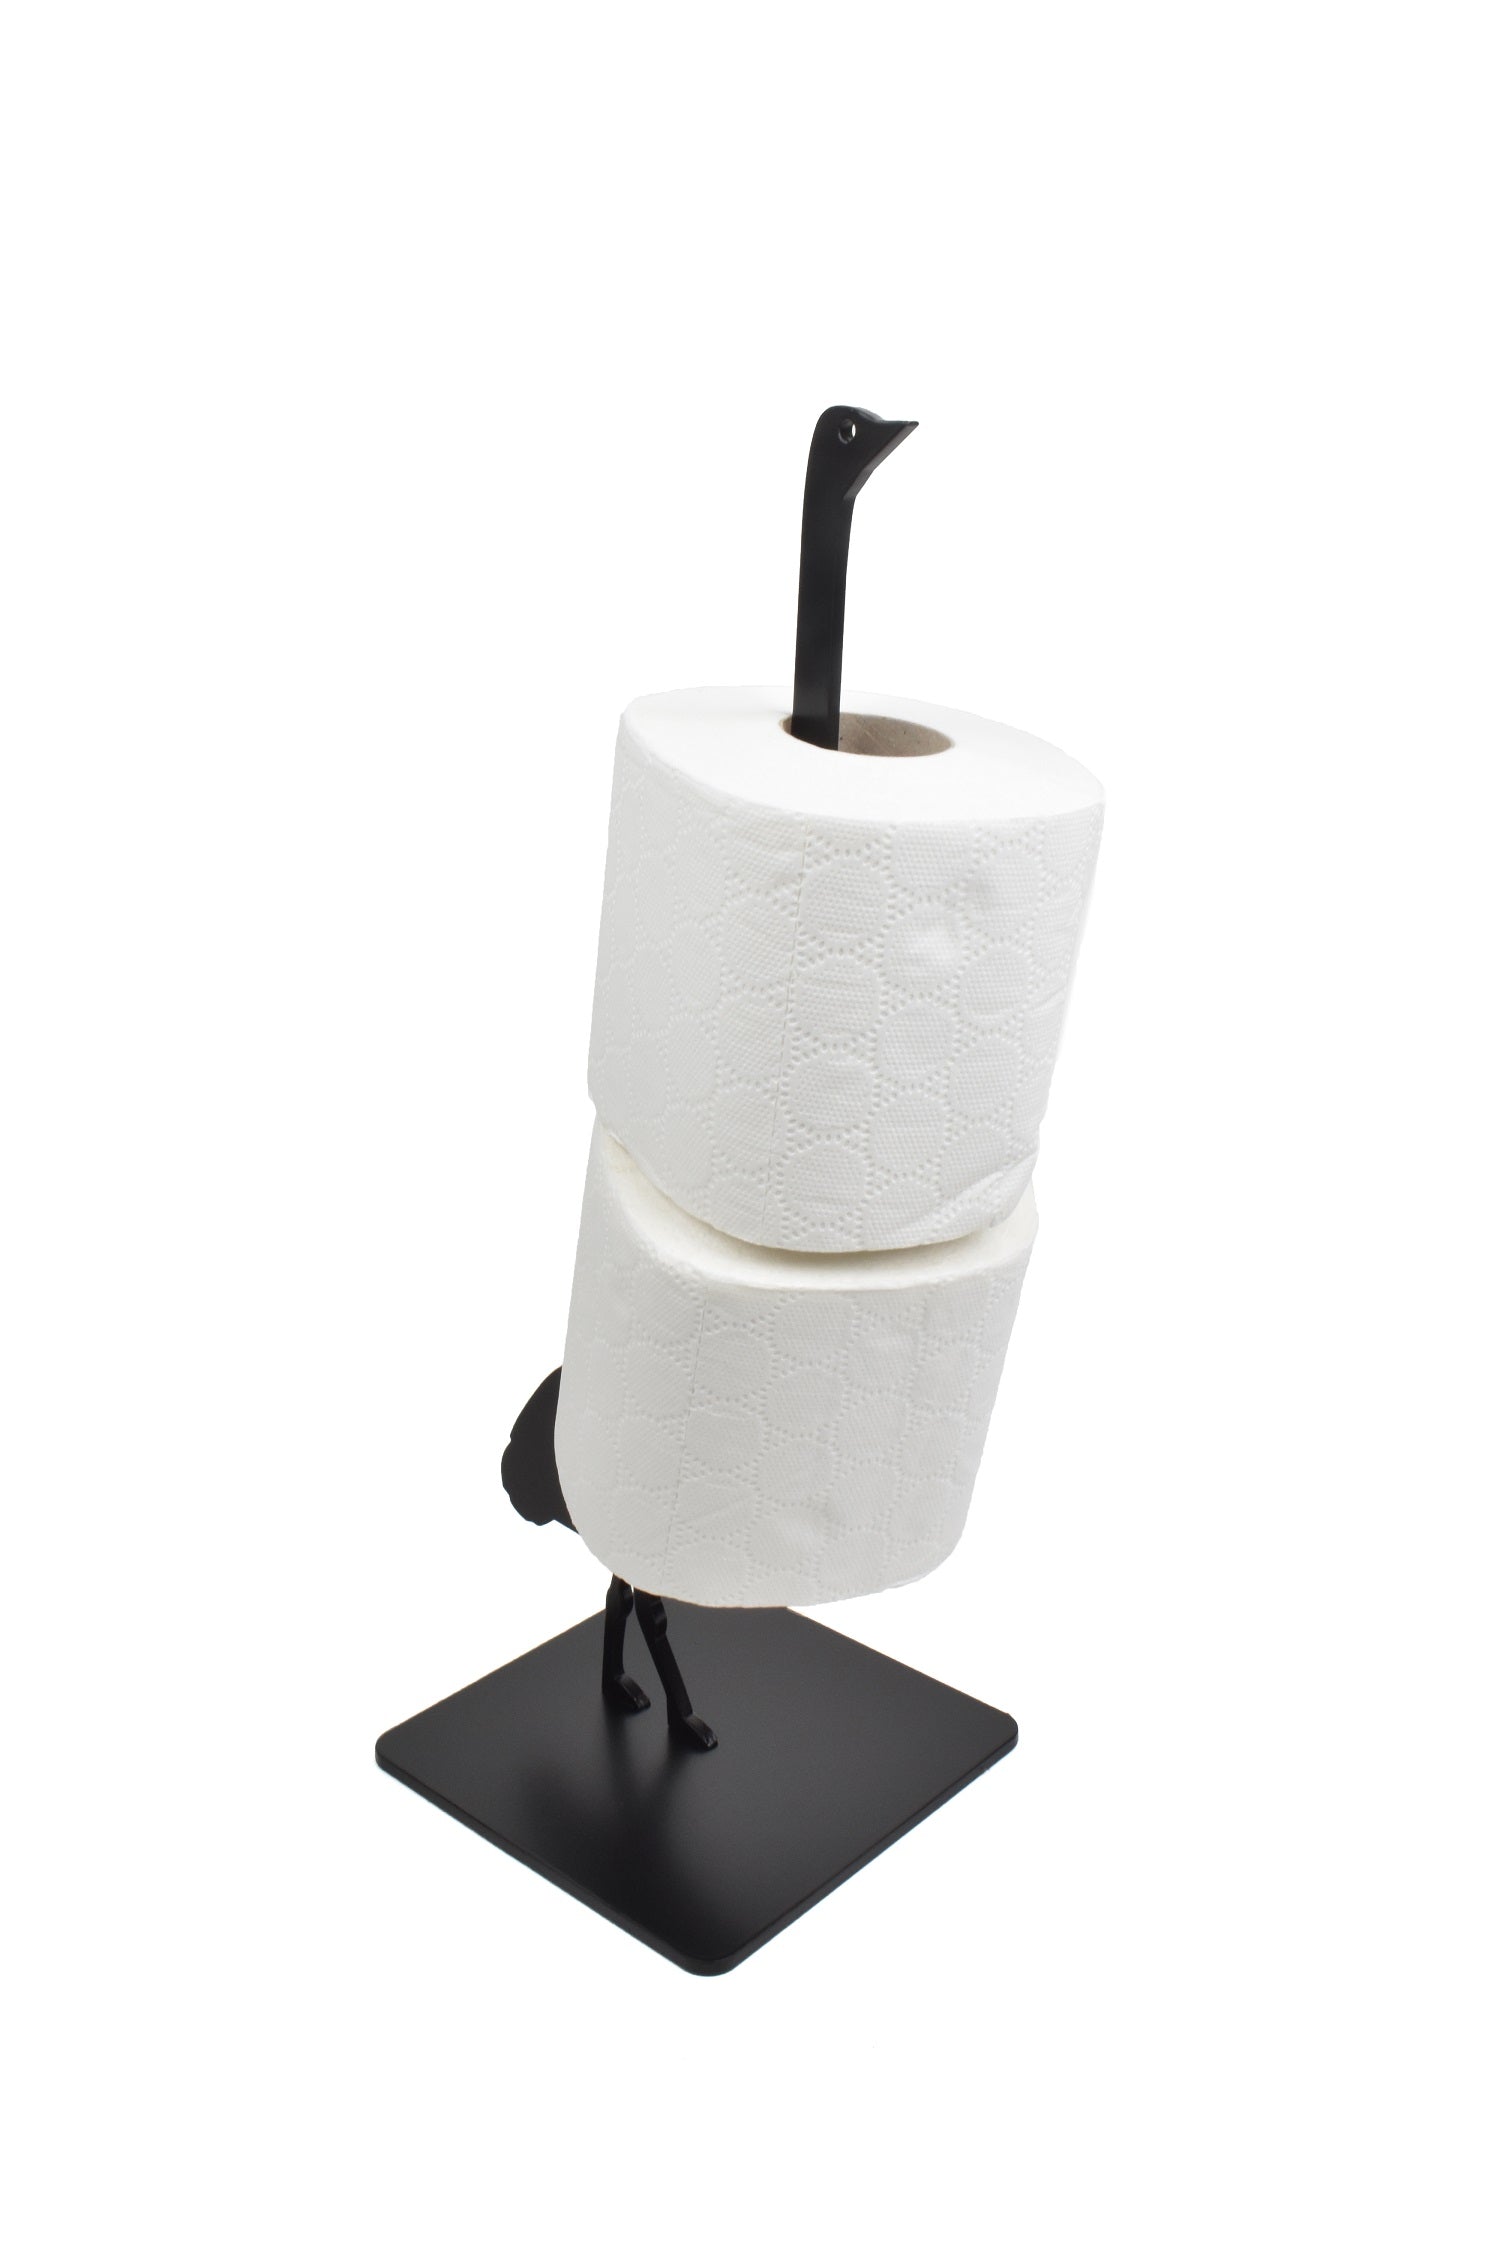 Okunaii Quirky Creature Toilet Roll Holder